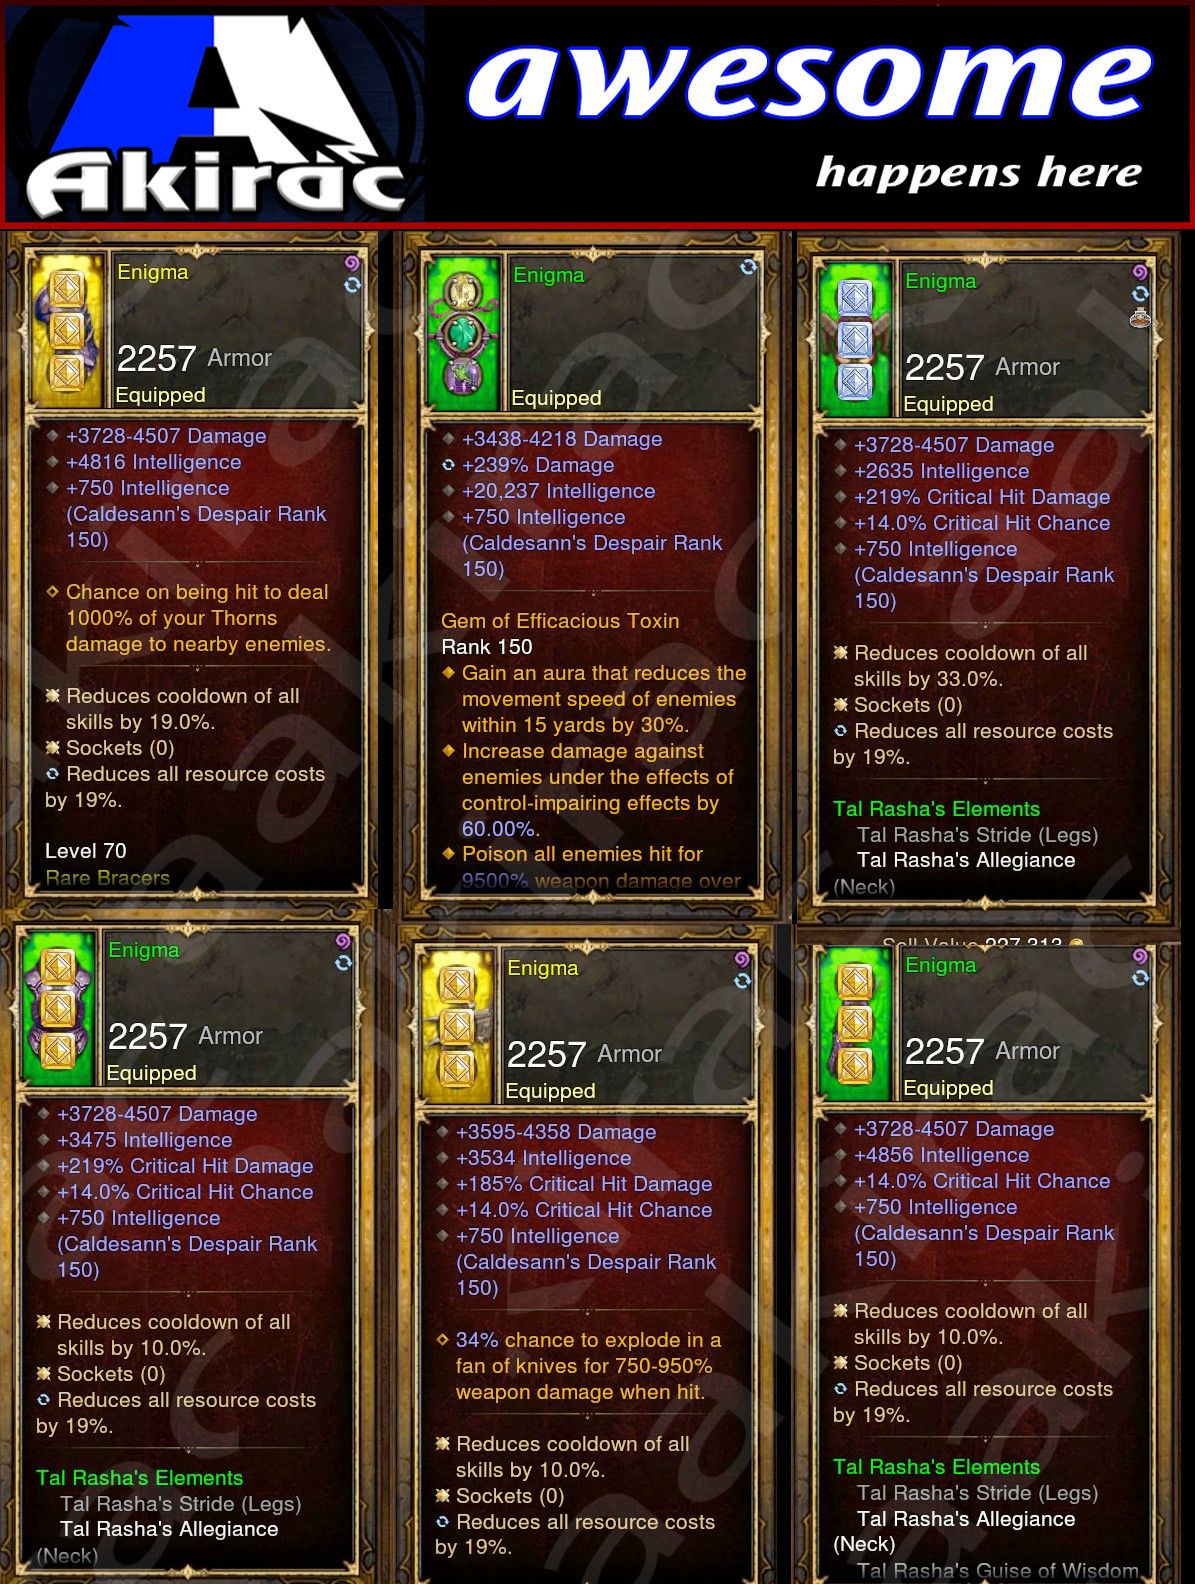 Diablo 3 Immortal v1 Tal Rasha Wizard Set for Rift 80-130 Enigma Diablo 3 Mods ROS Seasonal and Non Seasonal Save Mod - Modded Items and Gear - Hacks - Cheats - Trainers for Playstation 4 - Playstation 5 - Nintendo Switch - Xbox One